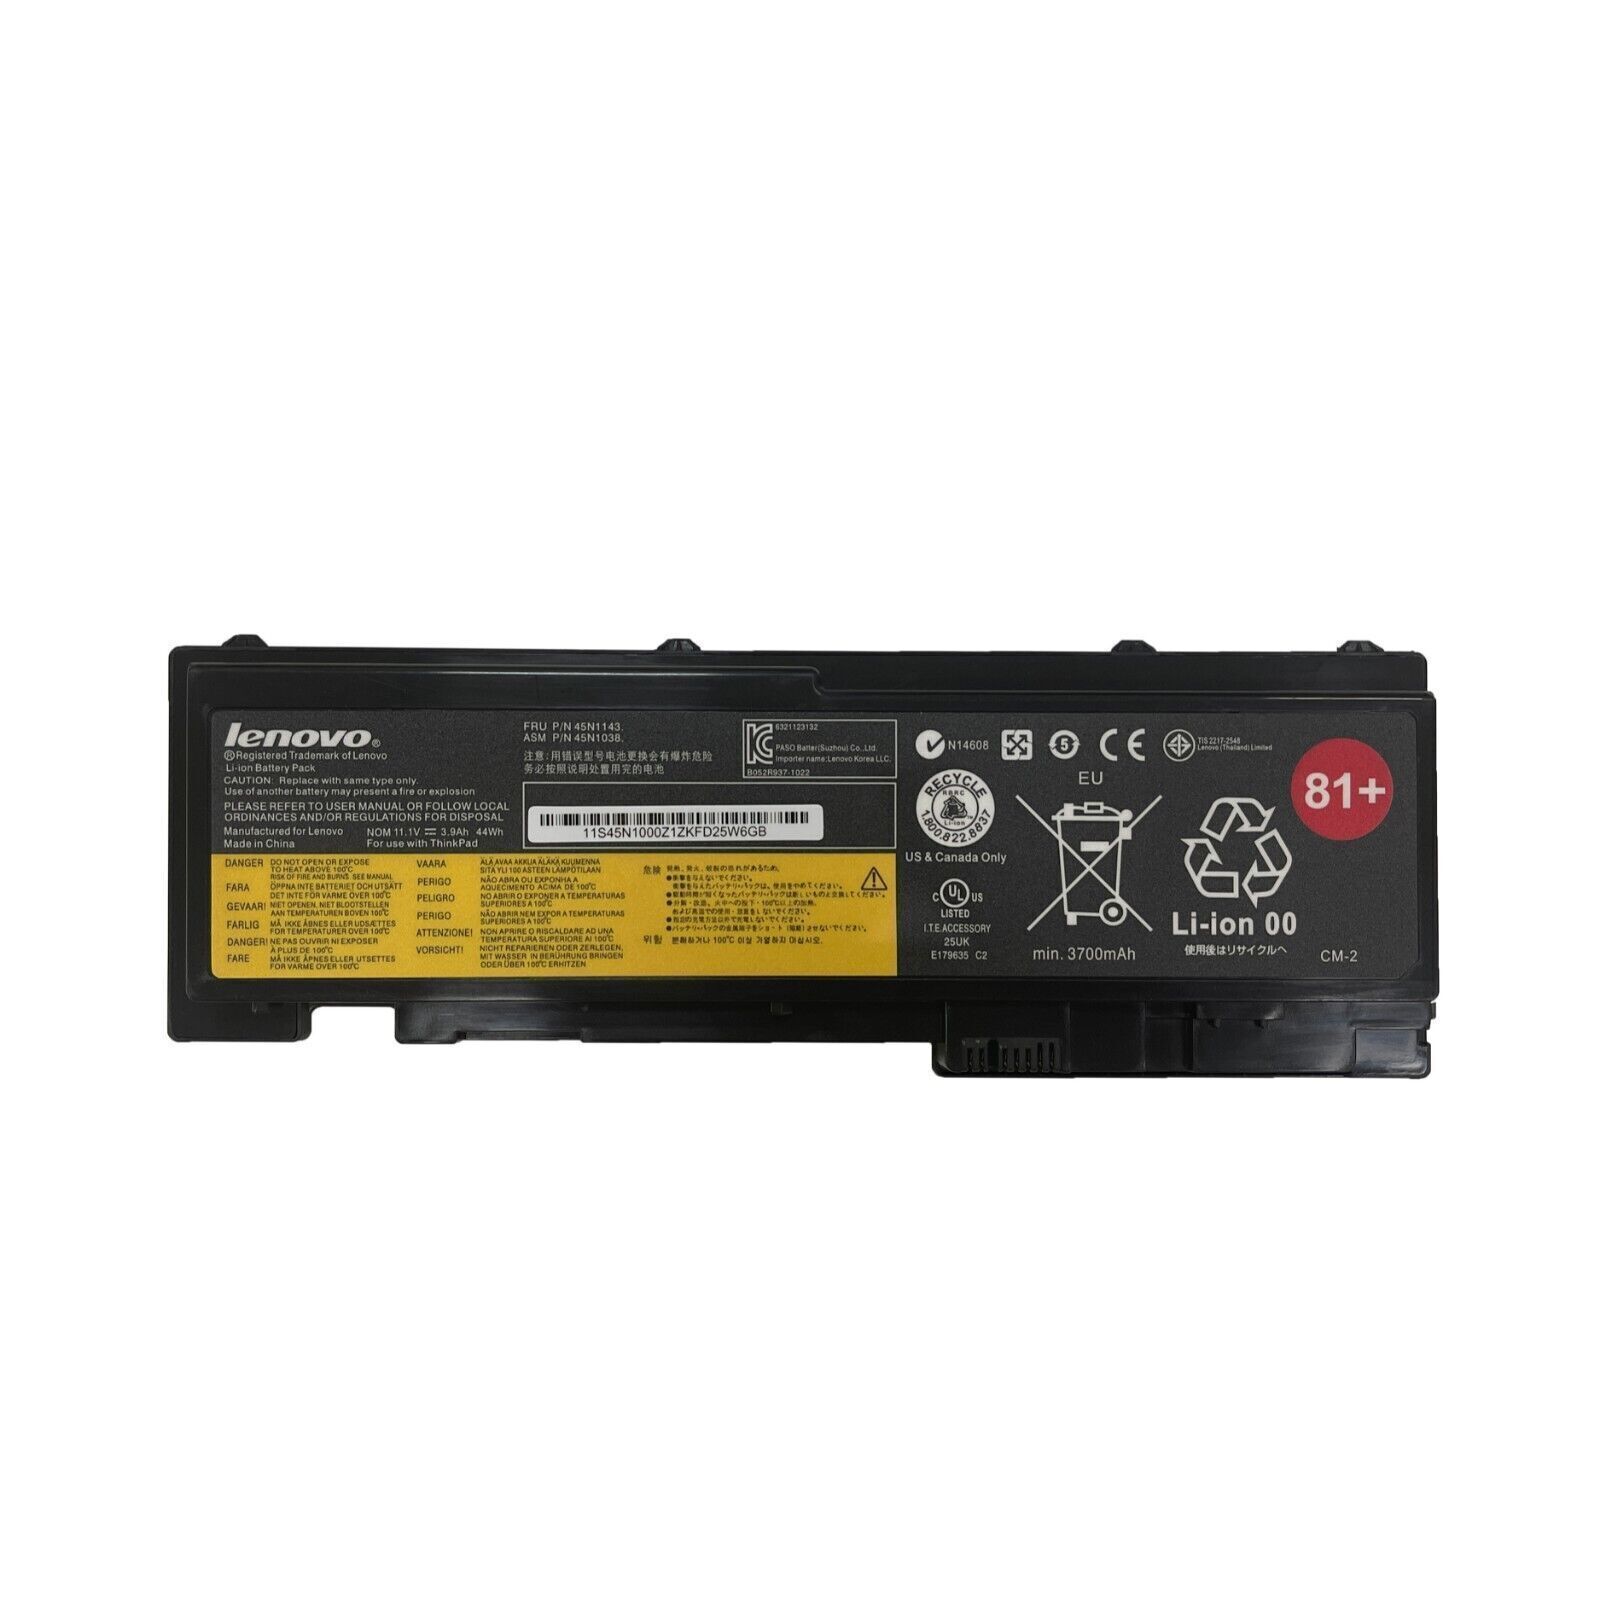 81+ OEM T430s Battery For Lenovo ThinkPad T420s T420i 0A36287 42T4844 42T4845